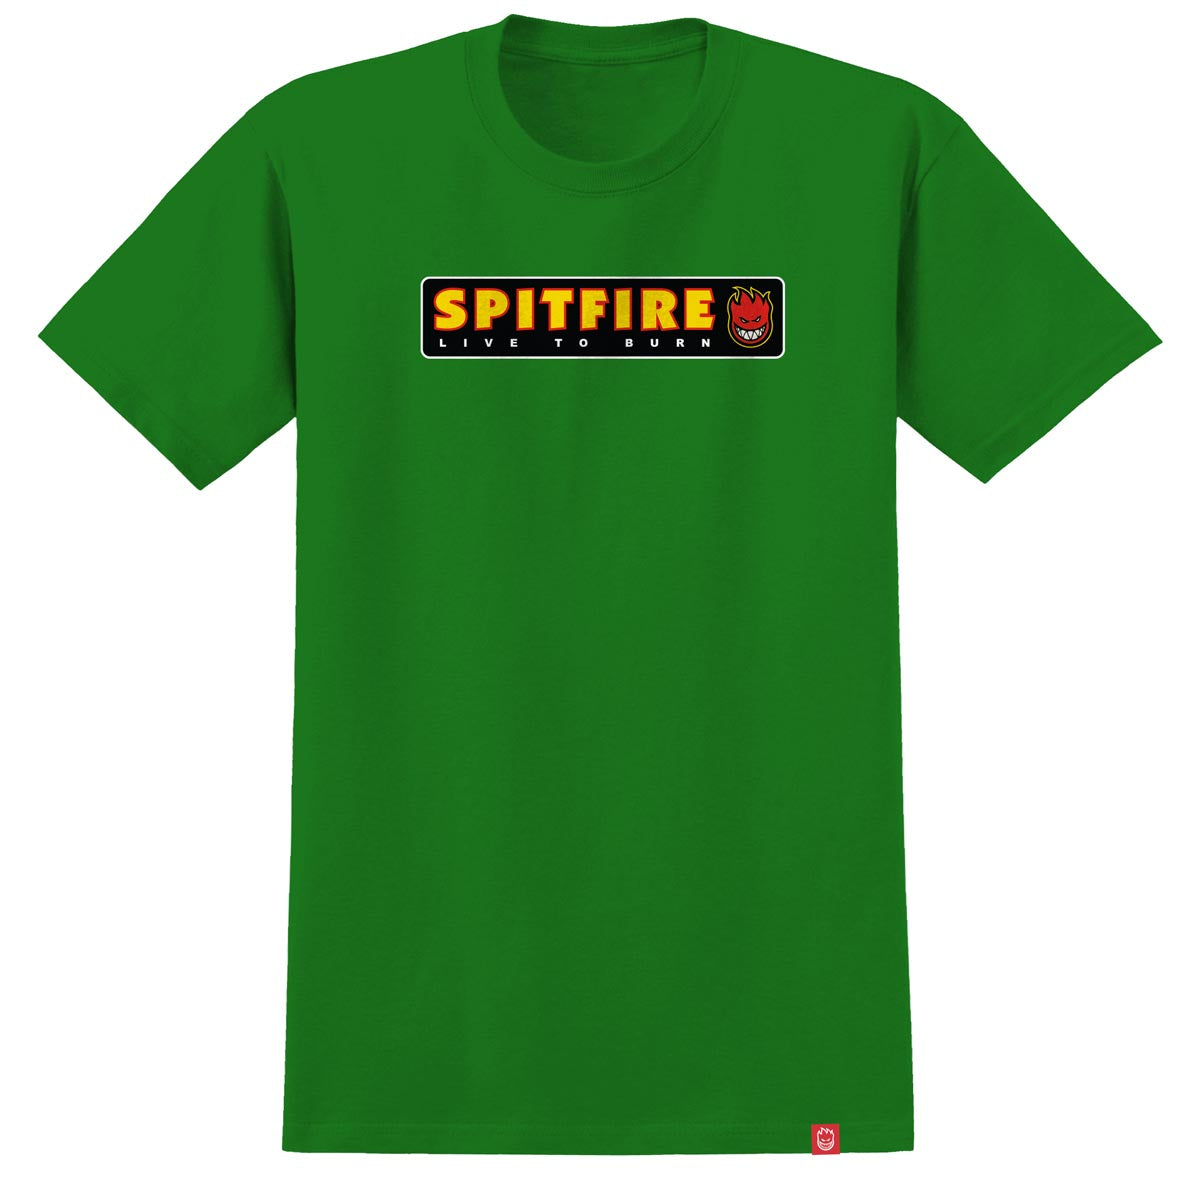 Spitfire Youth Ltb T-Shirt - Kelly/Multi Color image 1